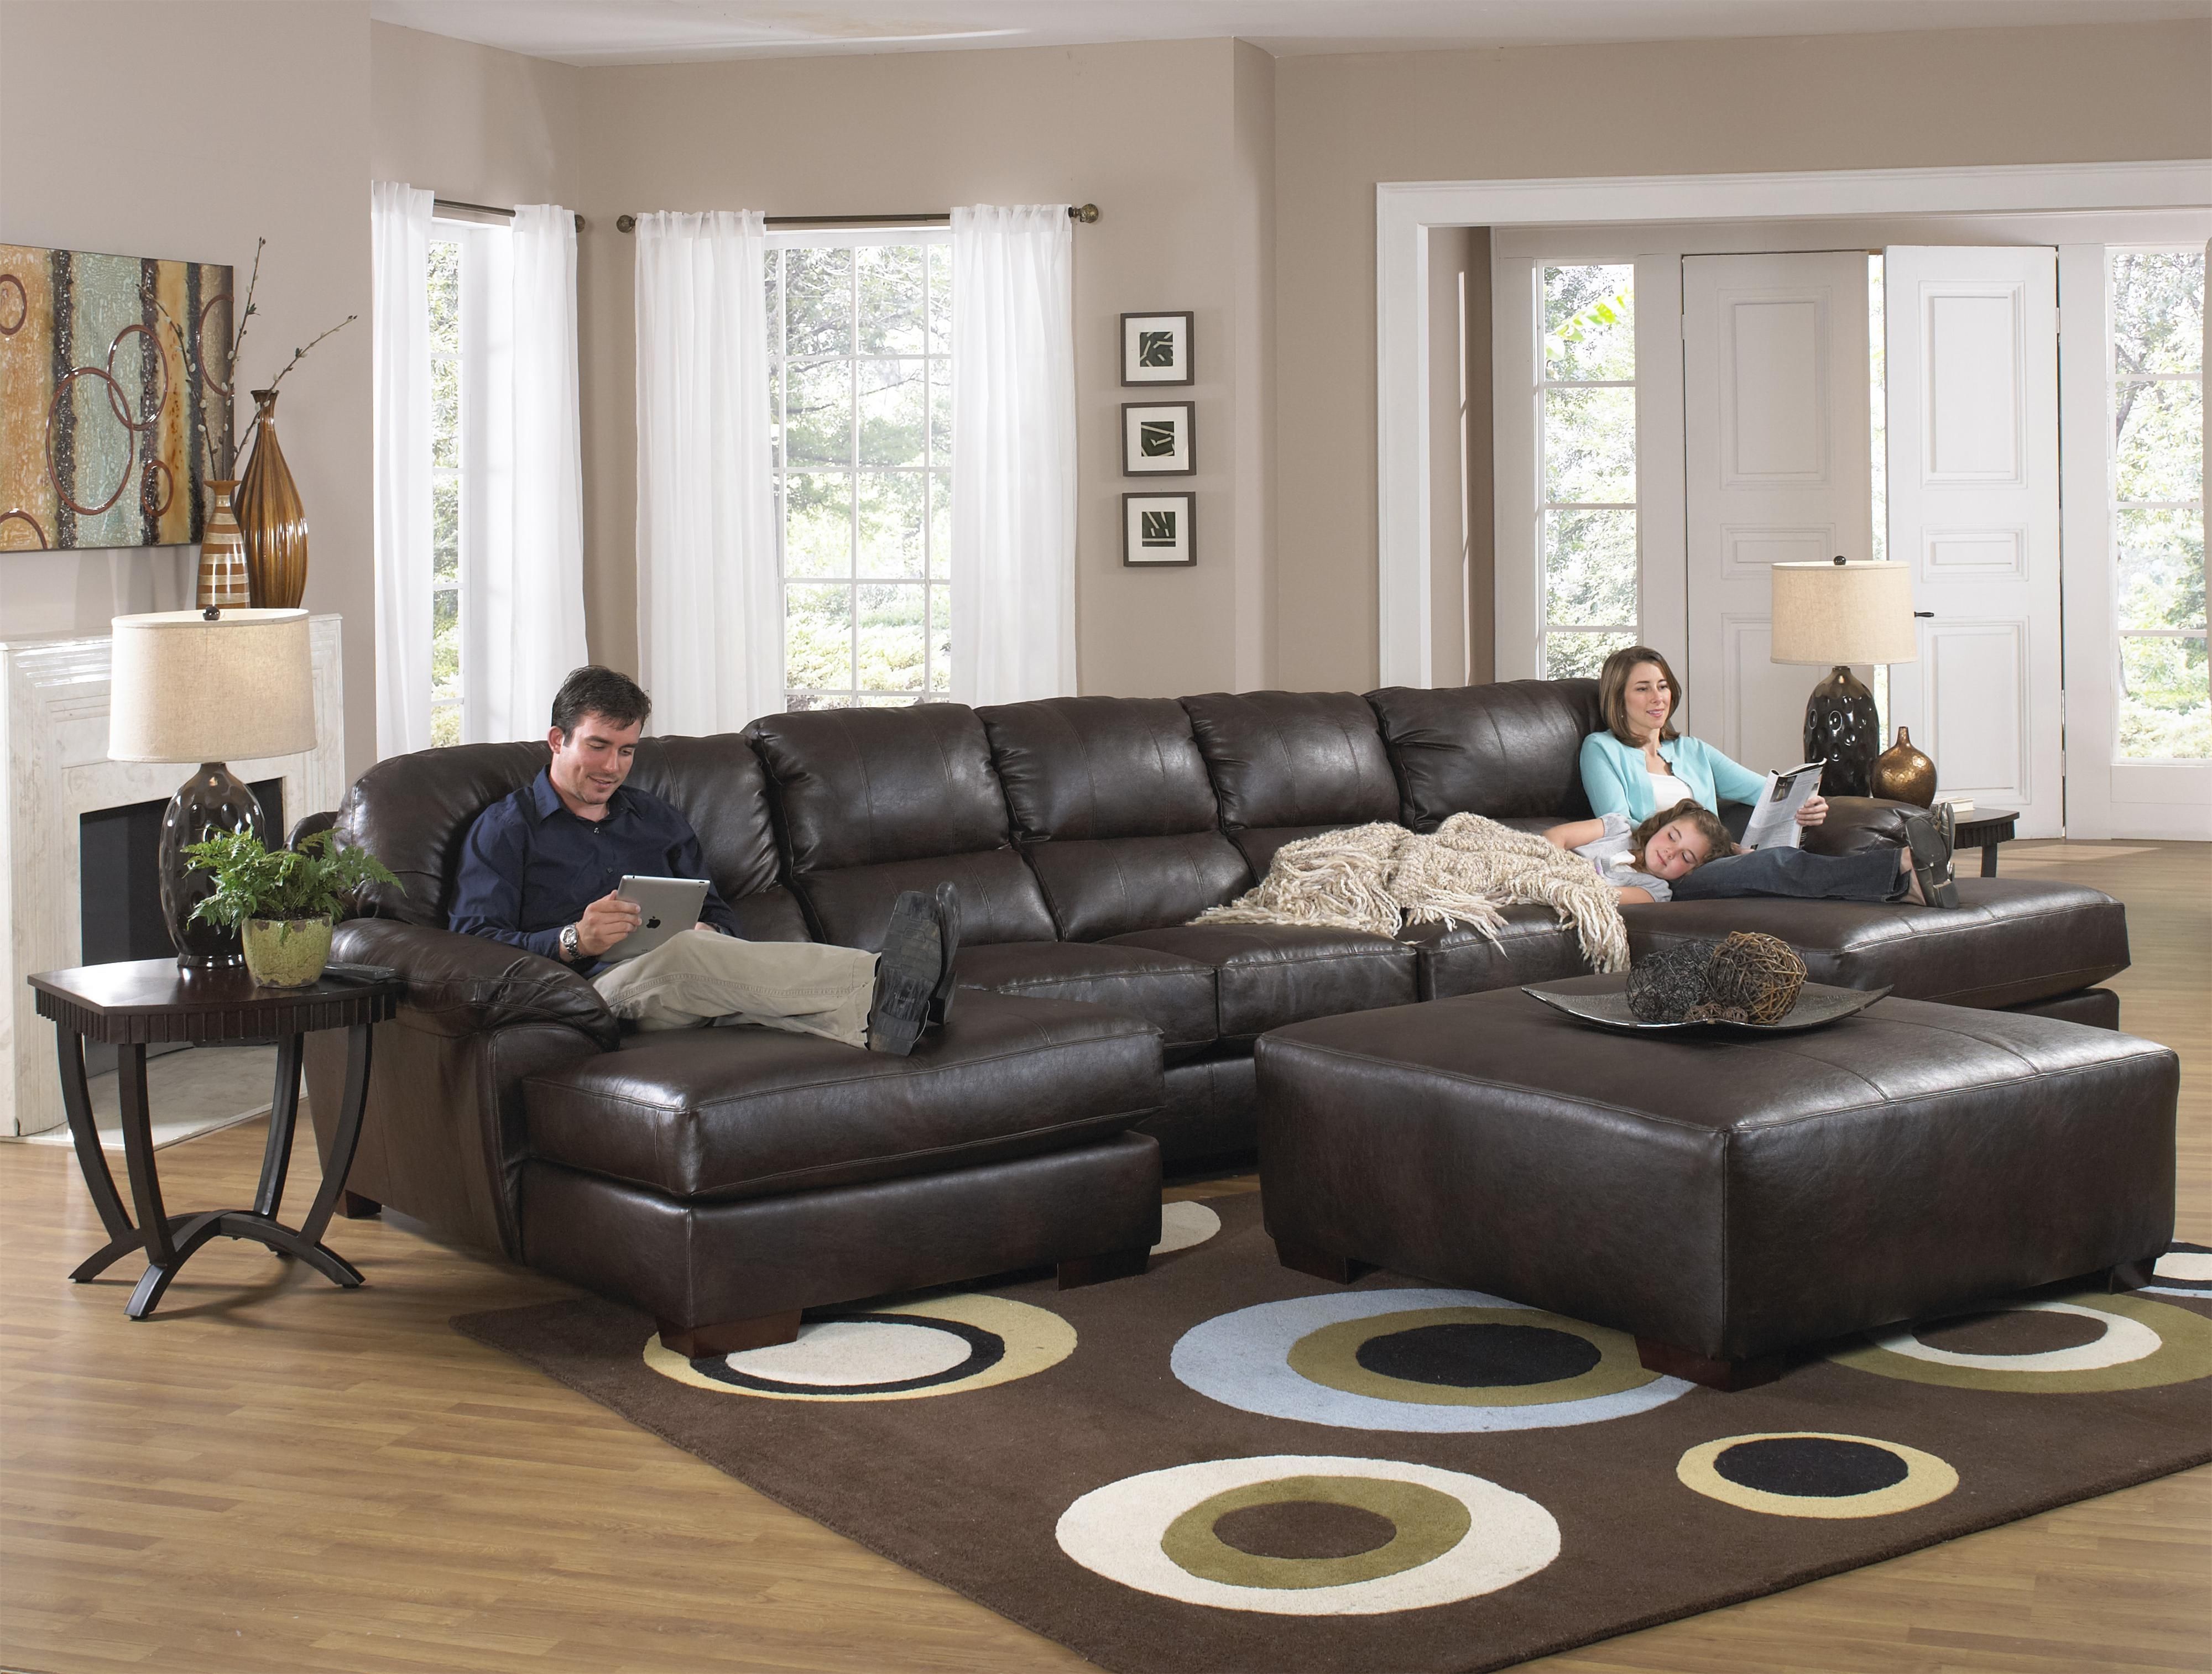 Most Recent Elliot Fabric Microfiber Sectional Sofa 3 Piece Microfiber Throughout Microfiber Sectional Sofas With Chaise (View 8 of 15)